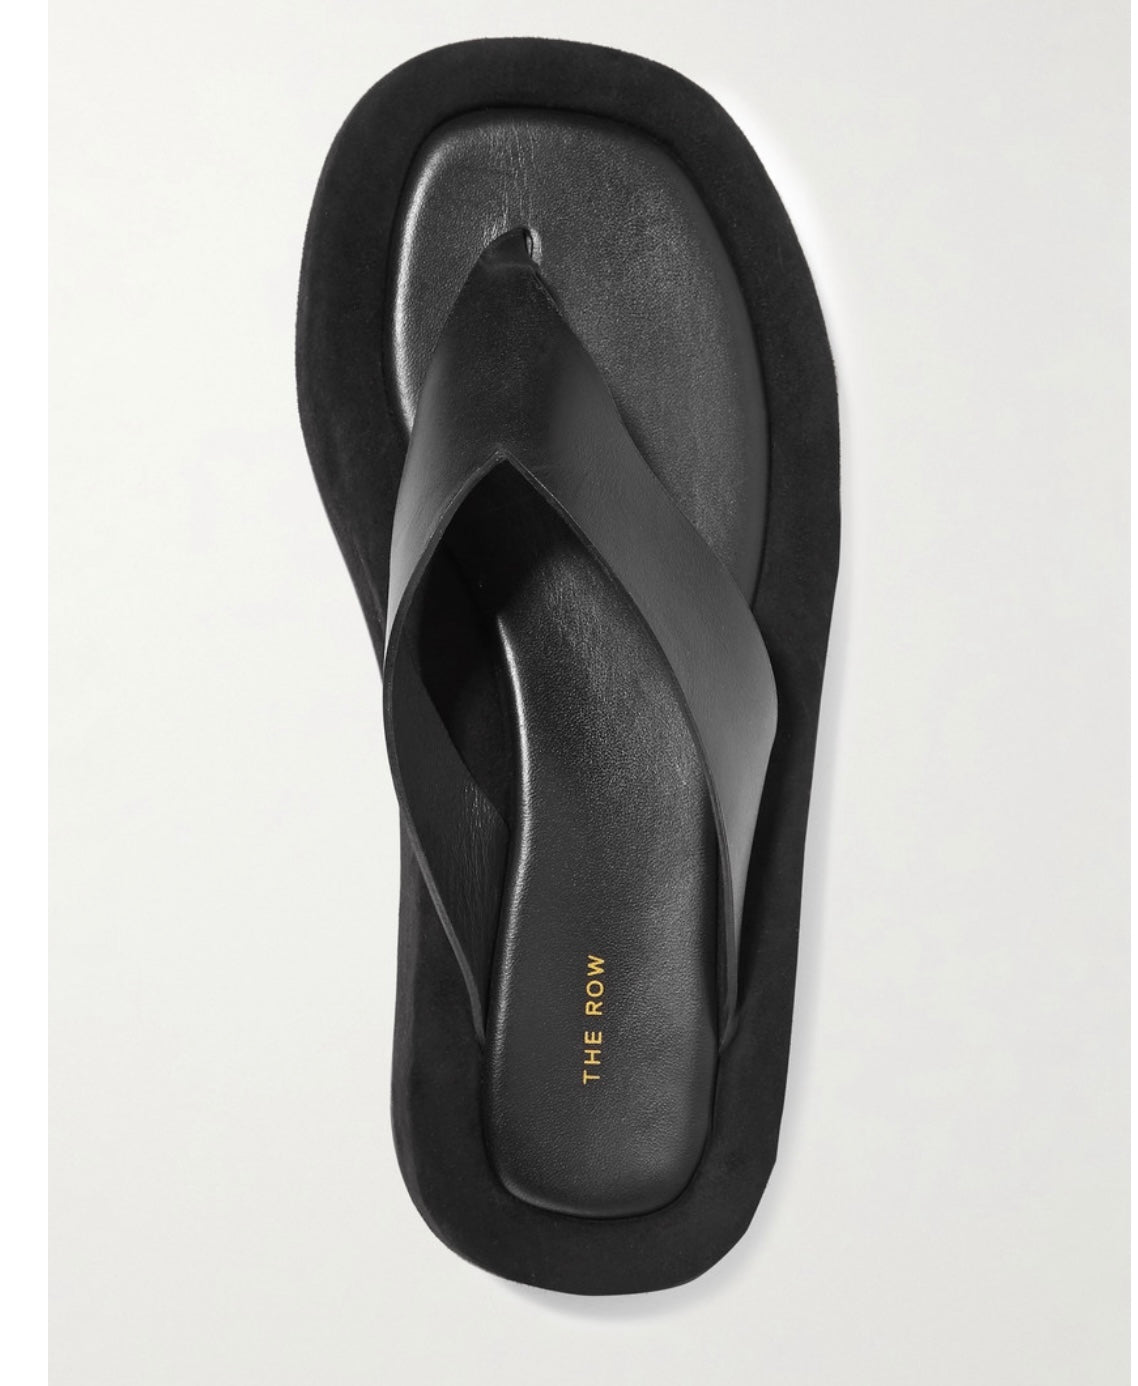 The Row- Ginza leather and suede flip flops